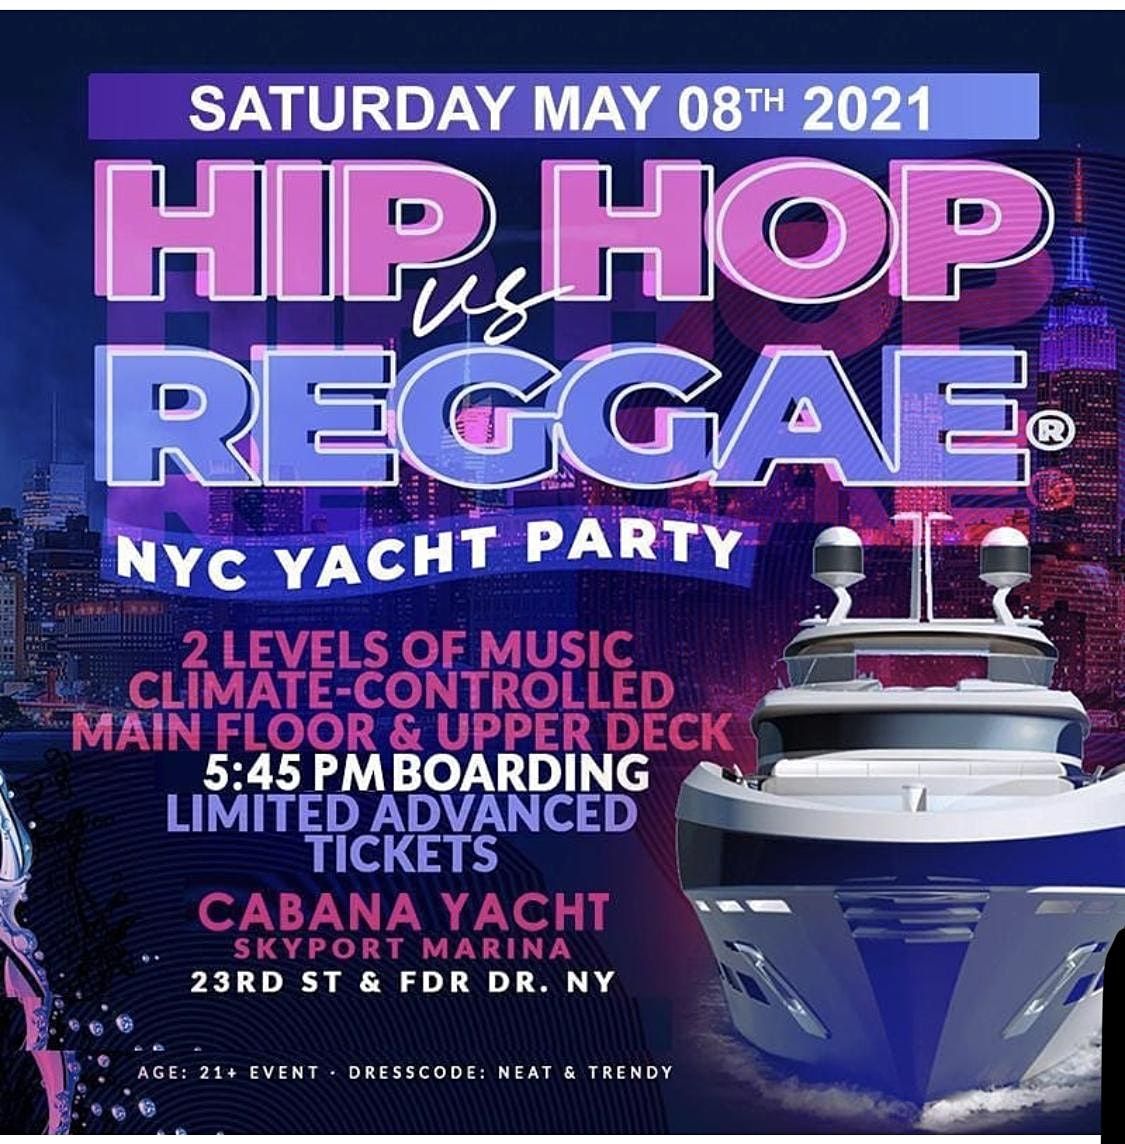 MIDNIGHT YACHT PARTY NYC! July 3rd